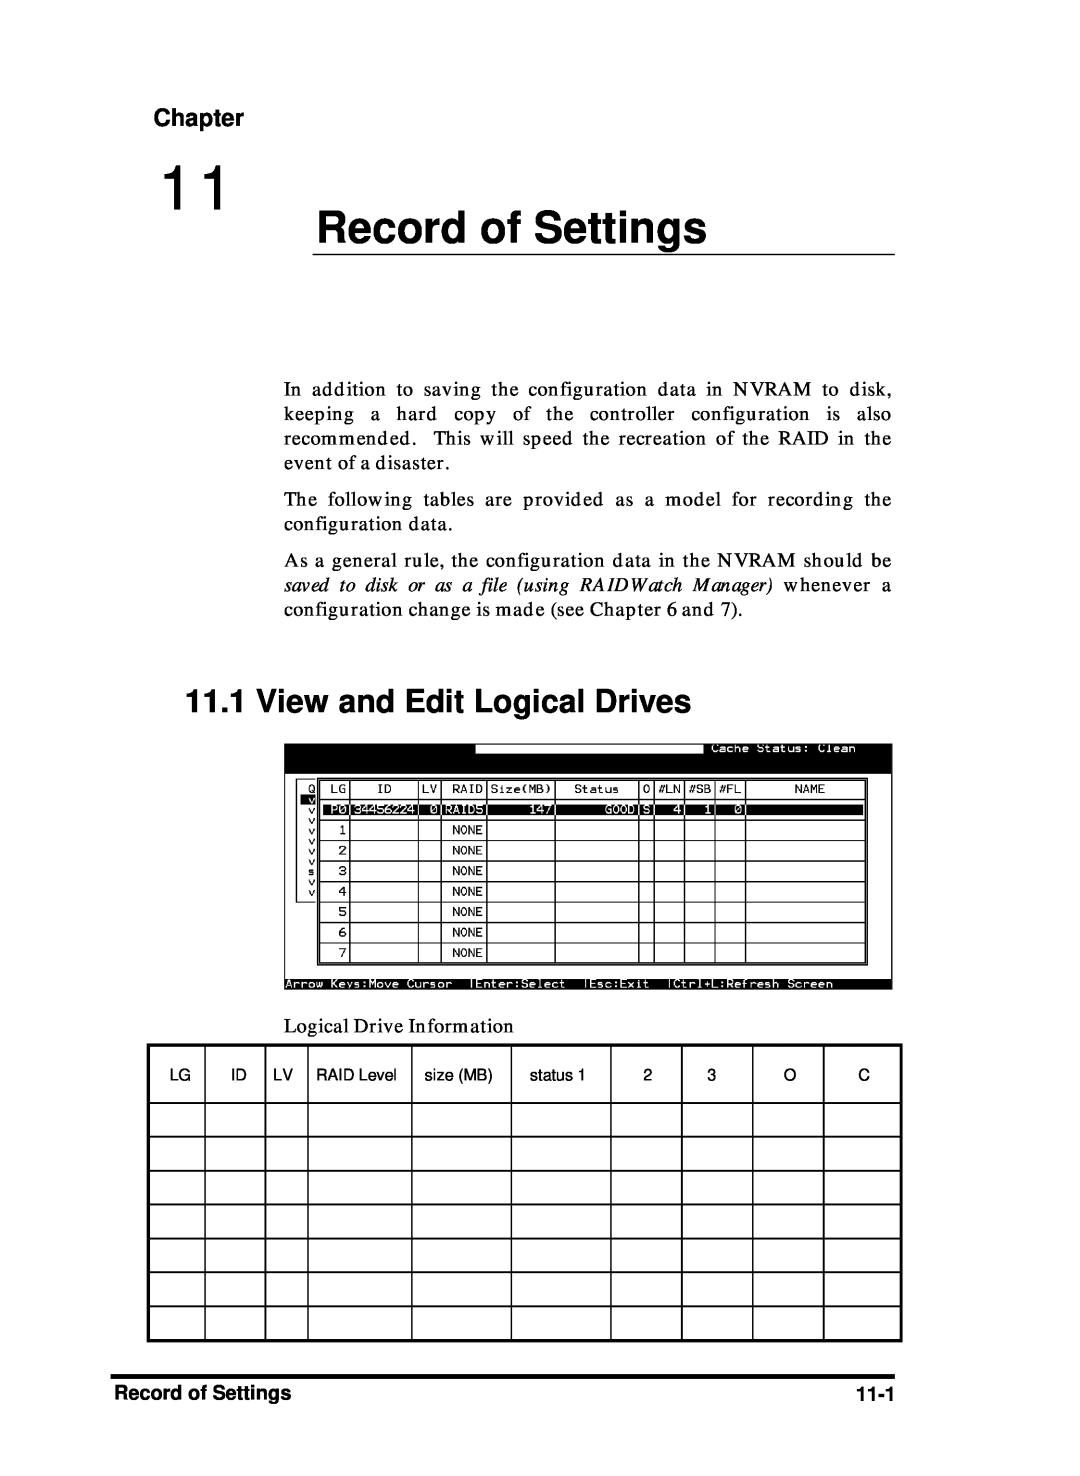 Compaq Infortrend manual Record of Settings, View and Edit Logical Drives, Chapter 